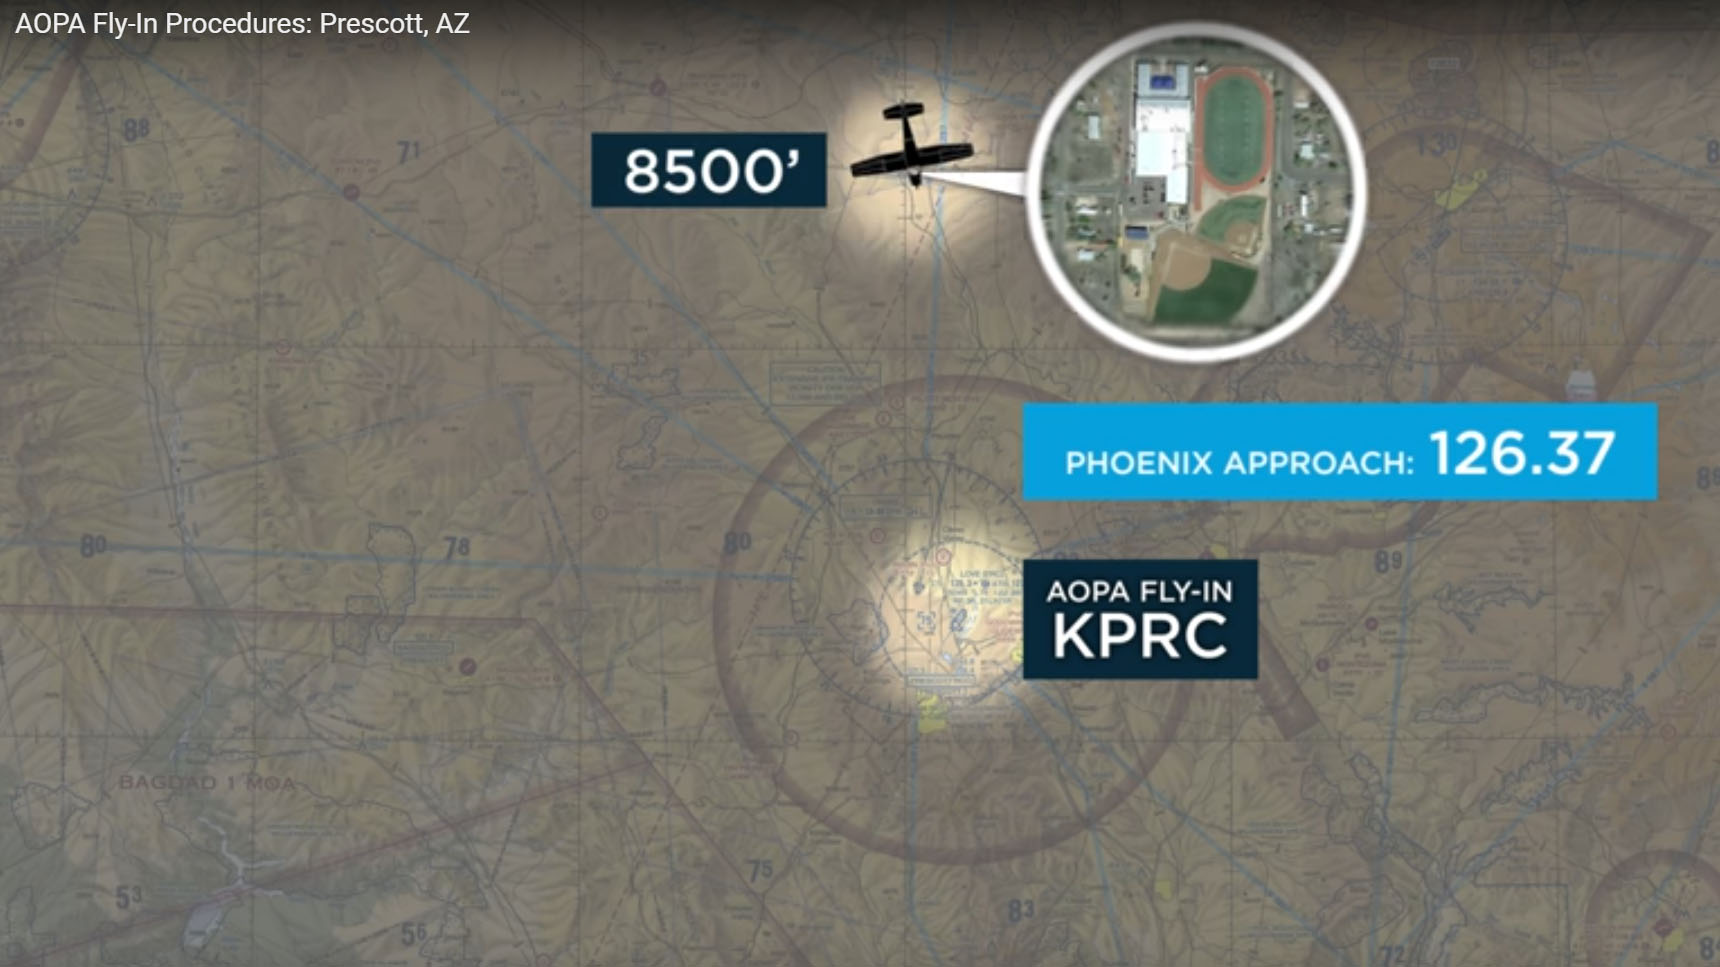 The AOPA Air Safety Institute creates customized video arrival procedures for each AOPA Fly-In.